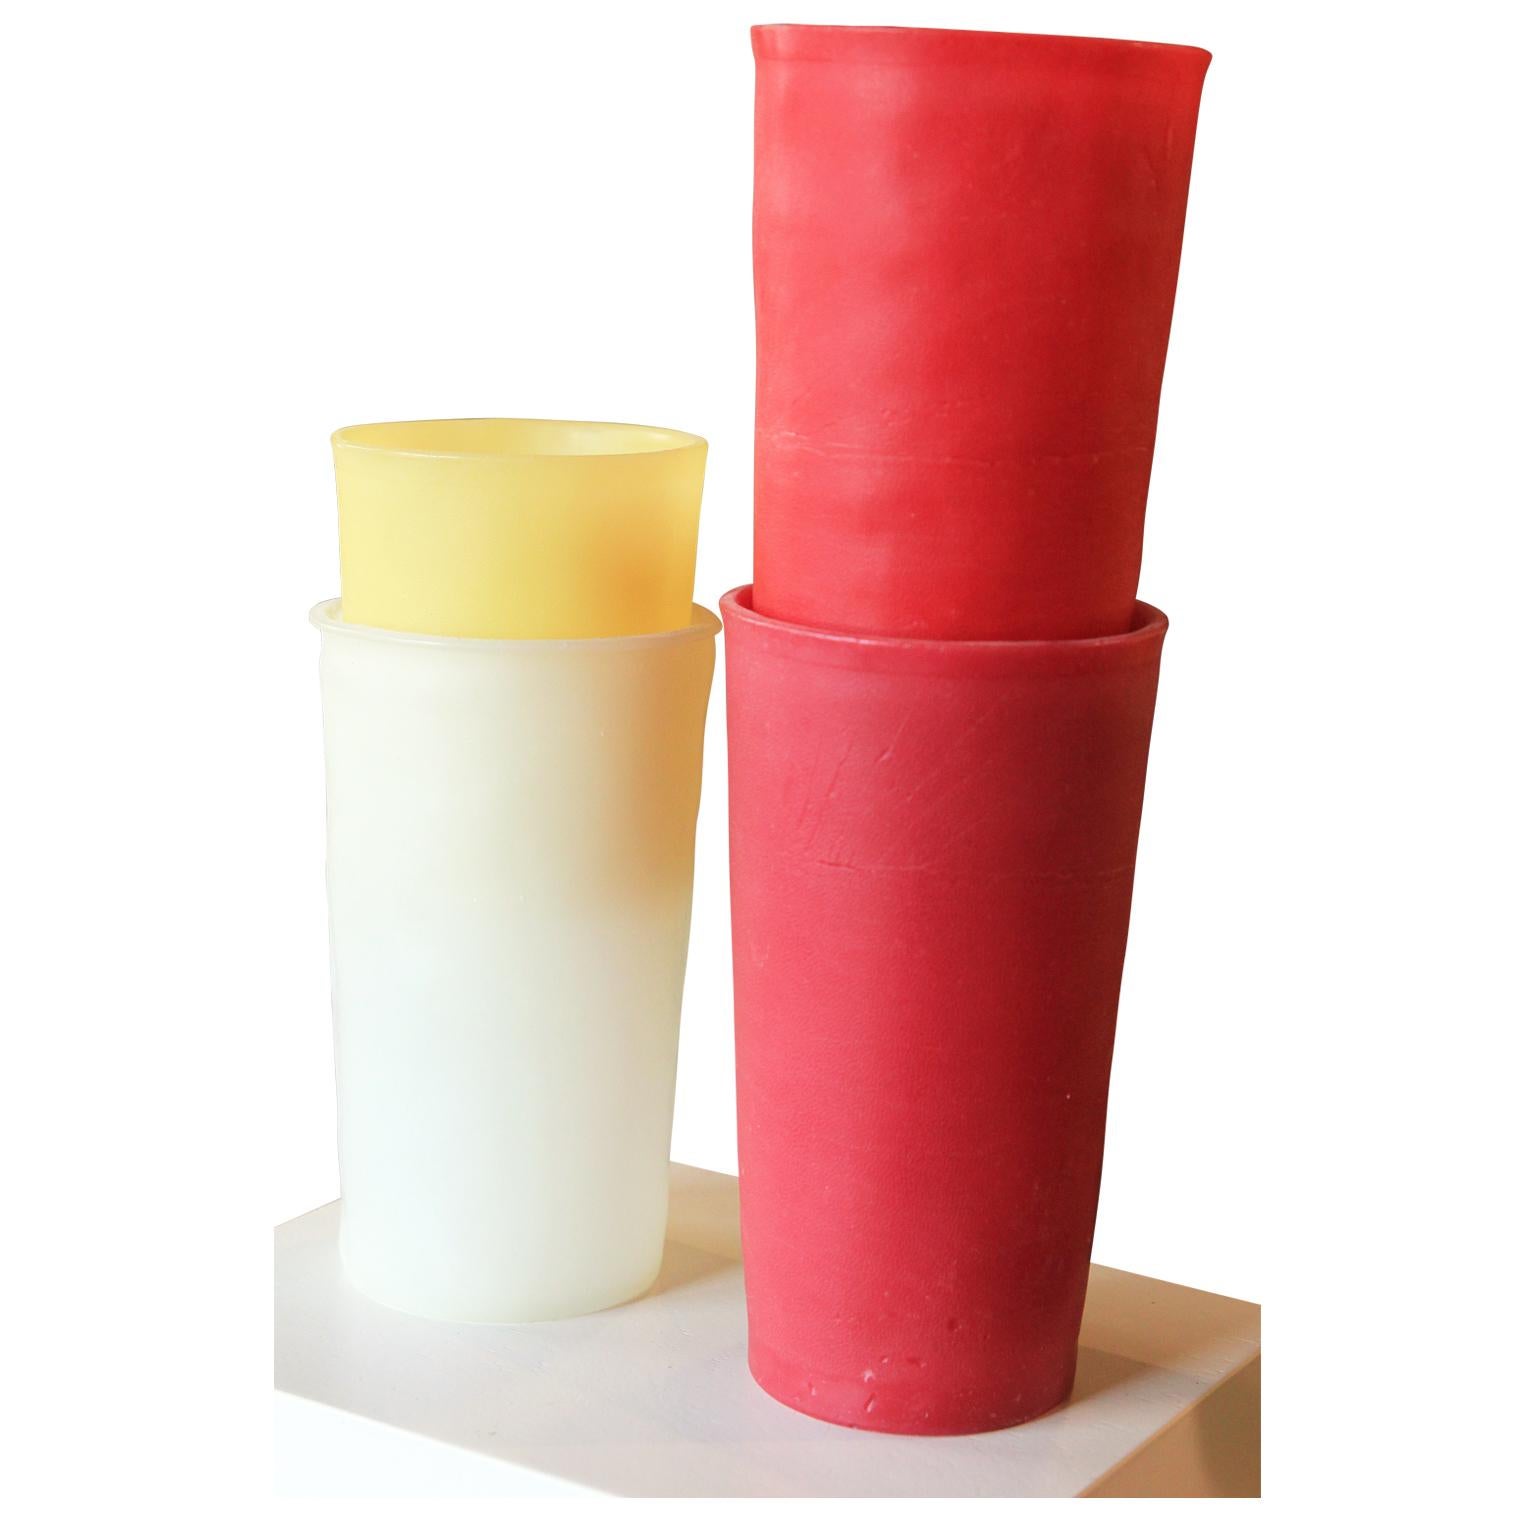 Modern collection of realistically rendered tupperware cups made out of beeswax and pigment by California artist George Stoll. The piece features a set of four red, yellow, and white cups neatly stacked on a white square base that can be hung on a